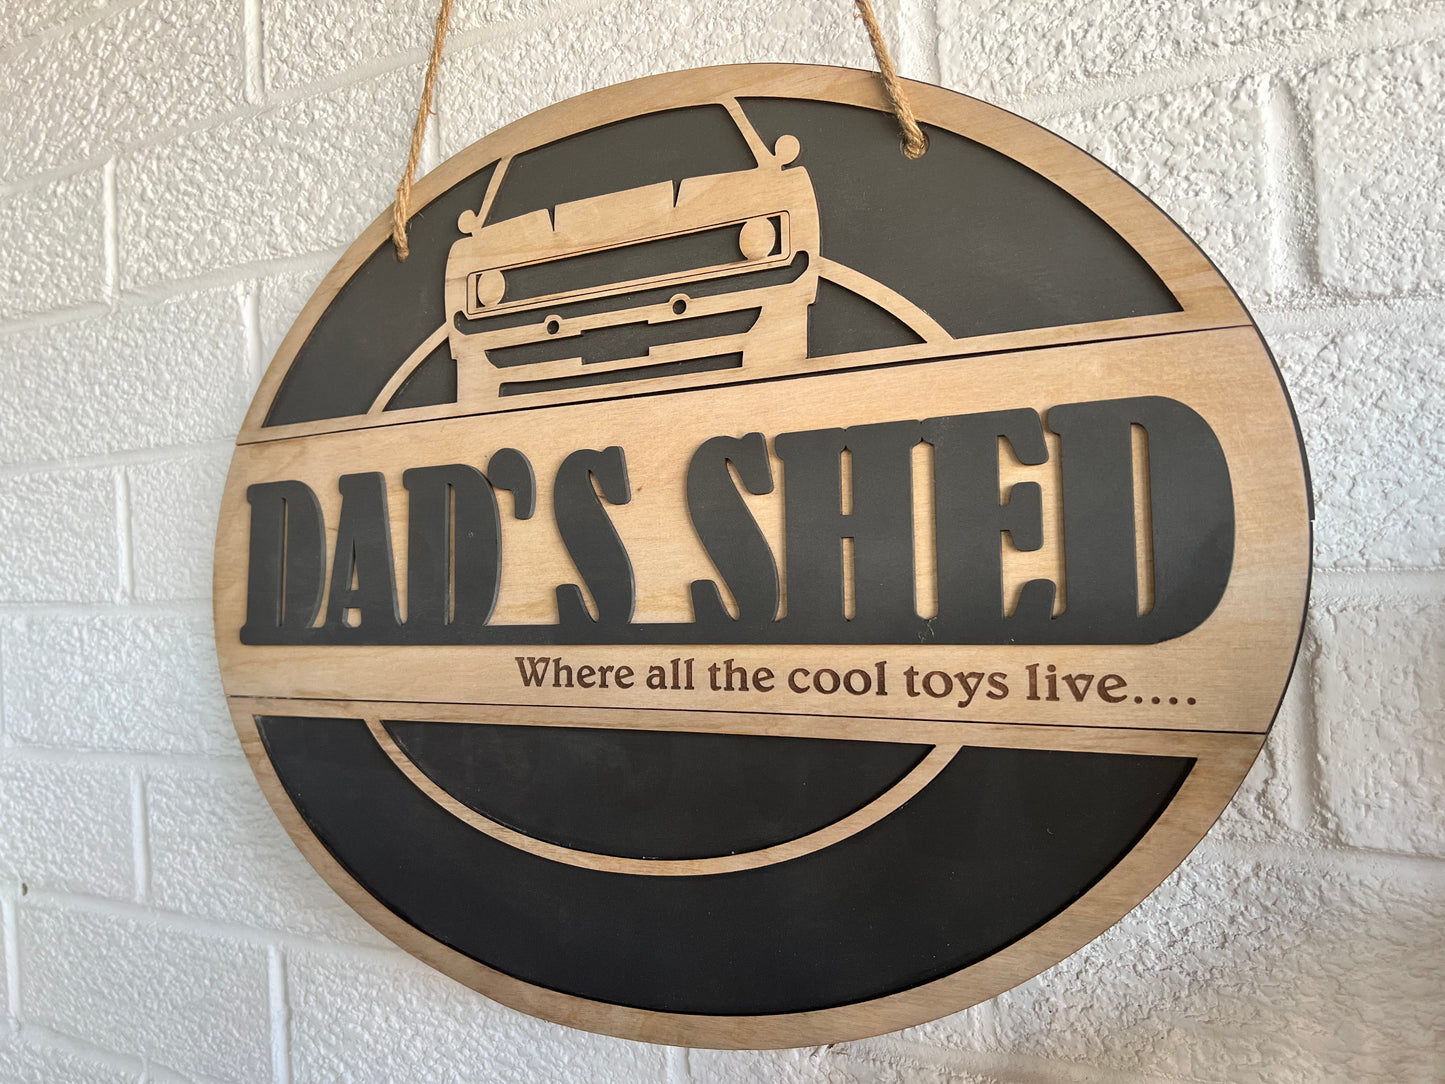 Oval Shape - Dad's Shed Wooden Sign - Where all the cool toys live..